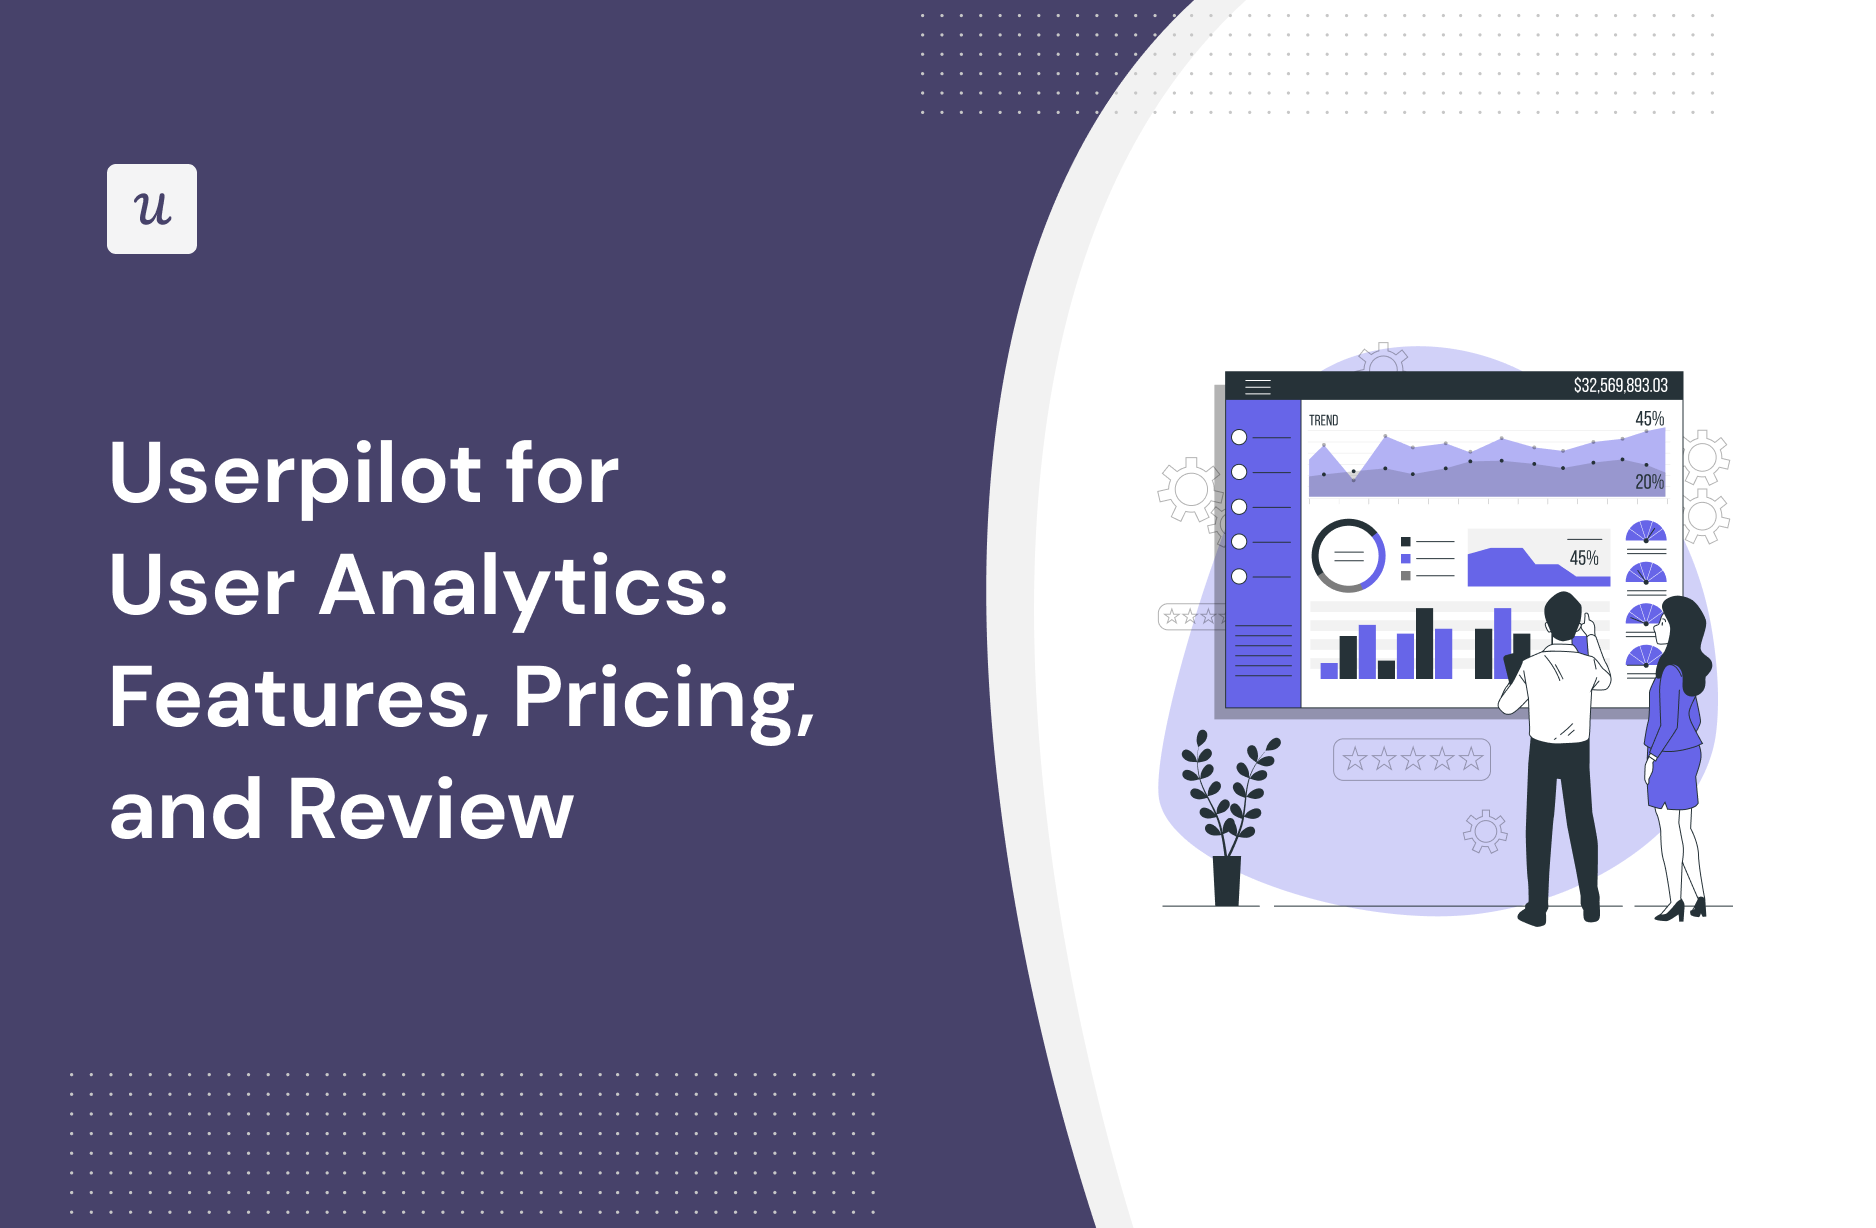 Userpilot for User Analytics: Features, Pricing, and Review